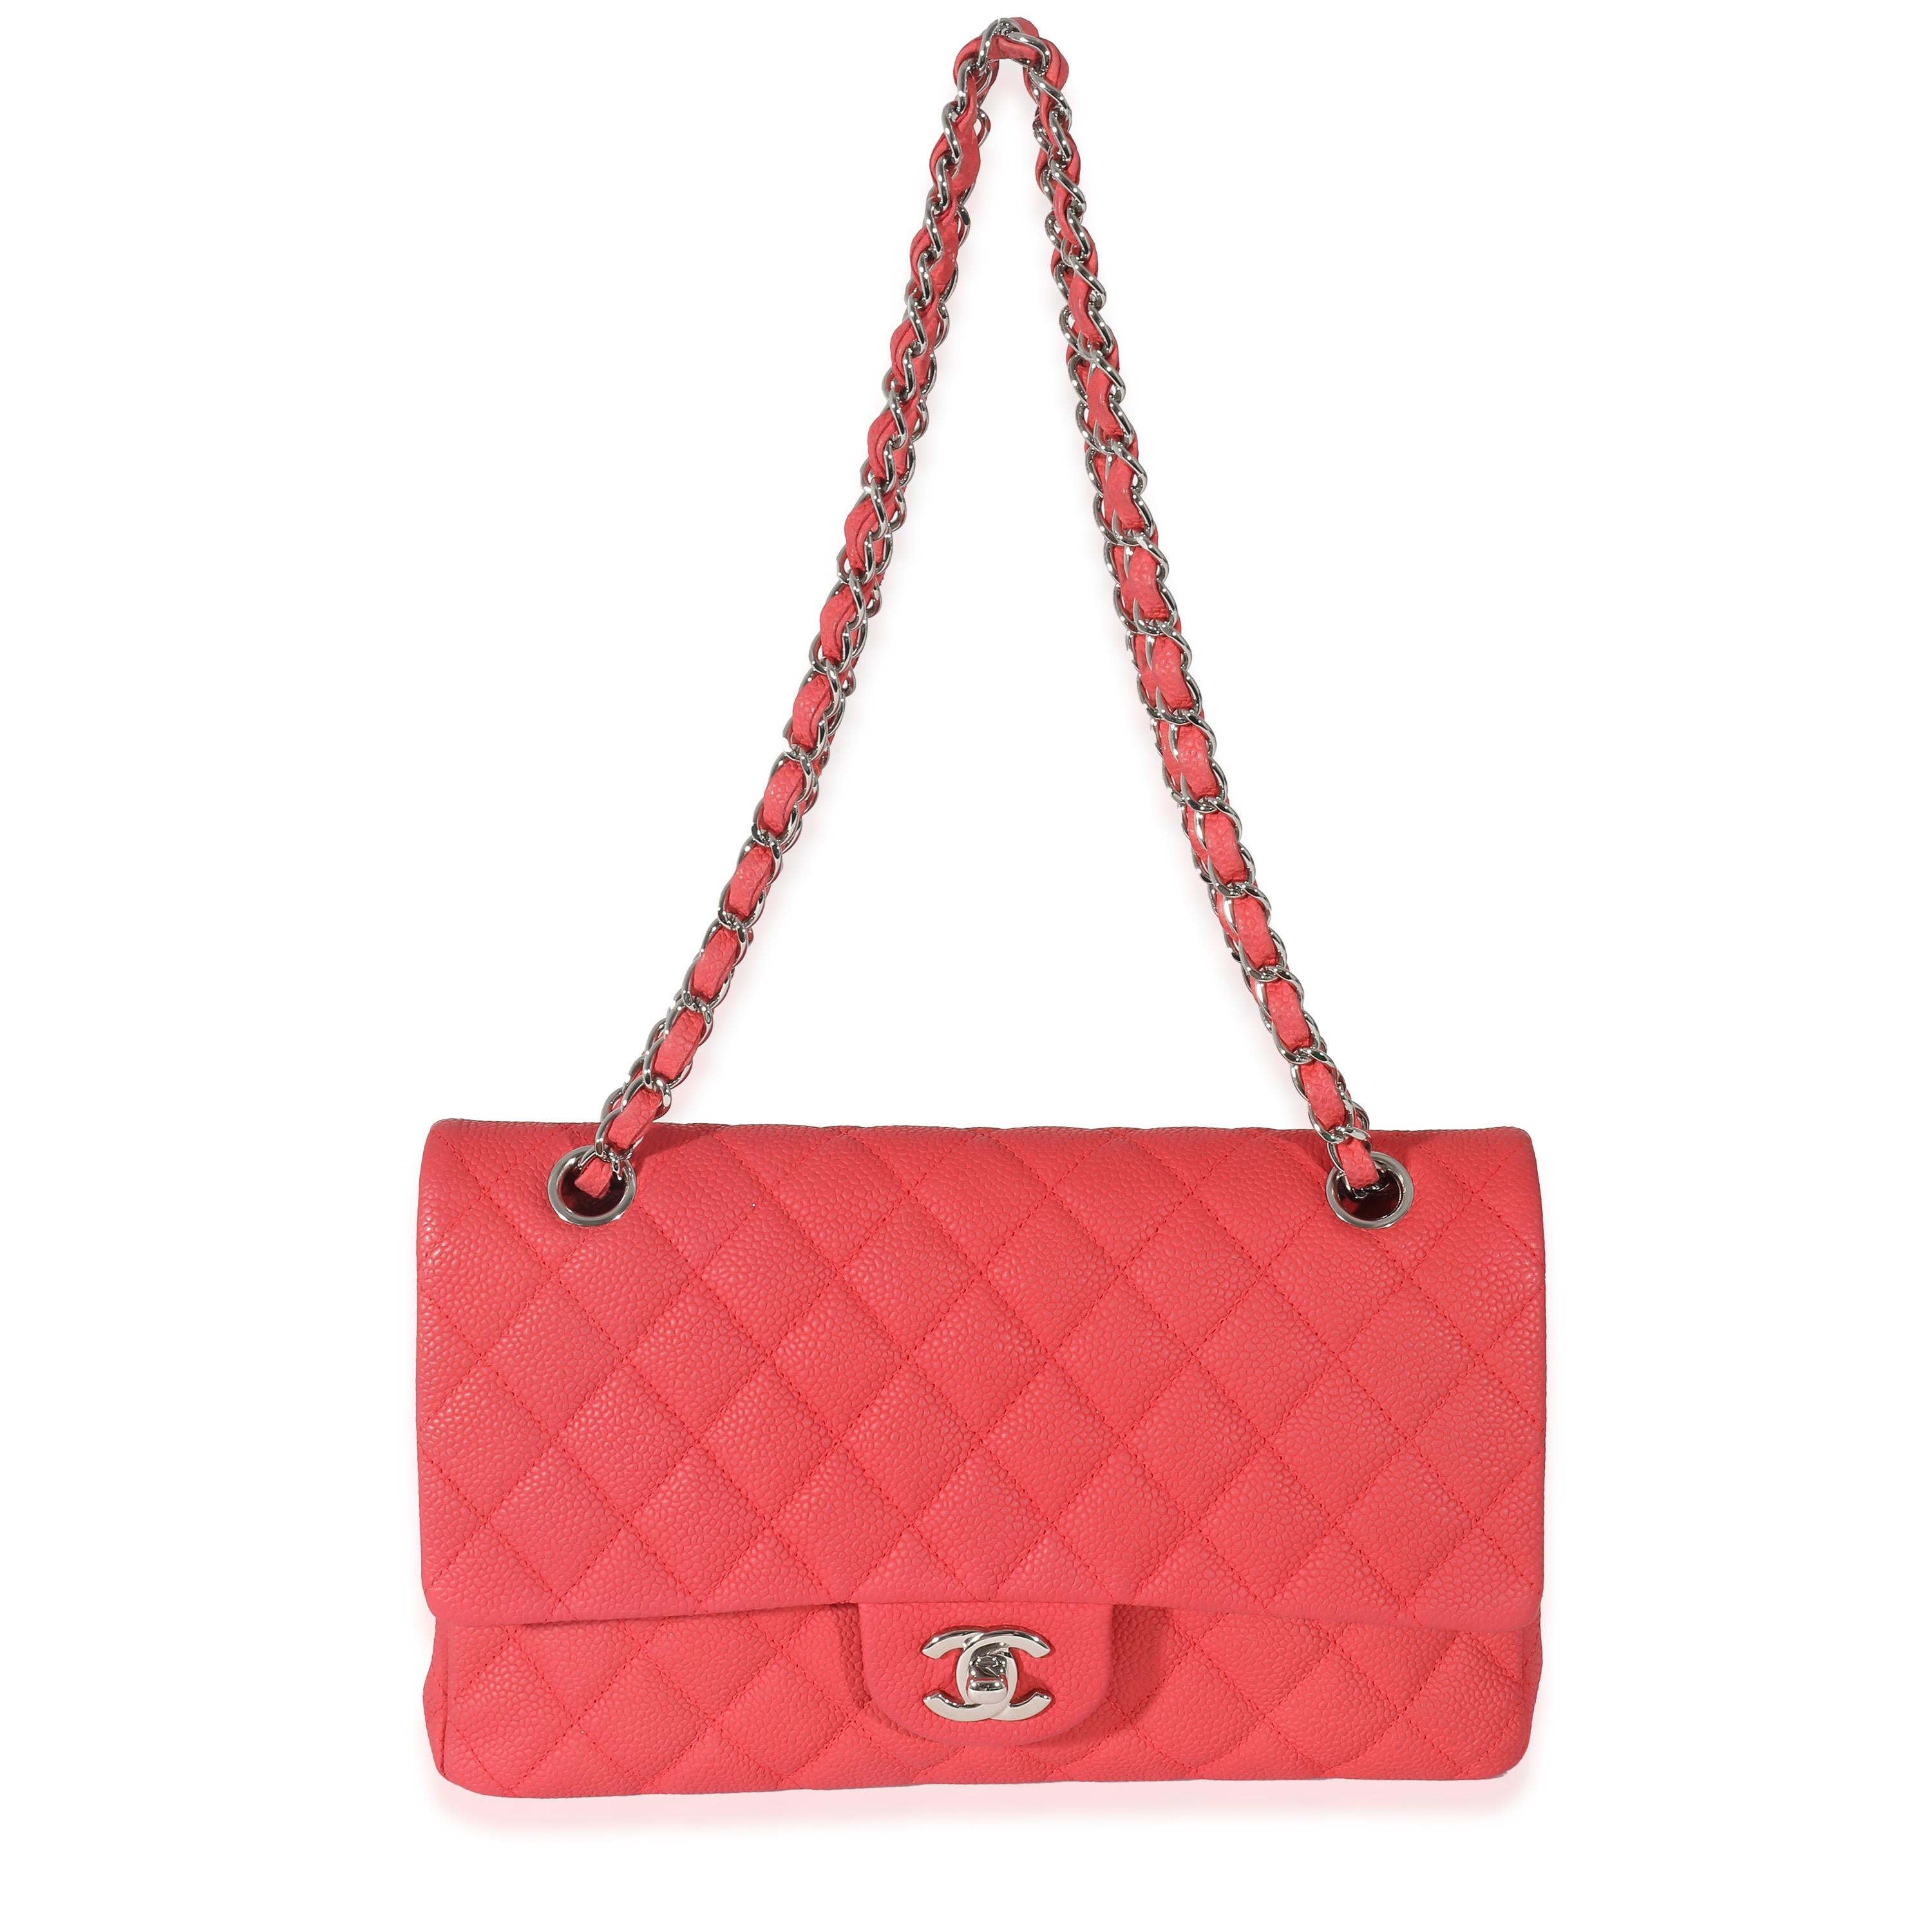 Listing Title: Chanel Red Matte Caviar Medium Double Flap Bag
SKU: 132847
MSRP: 10200.00 USD
Condition: Pre-owned 
Handbag Condition: Very Good
Condition Comments: Item is in very good condition with minor signs of wear. Exterior scuffing and